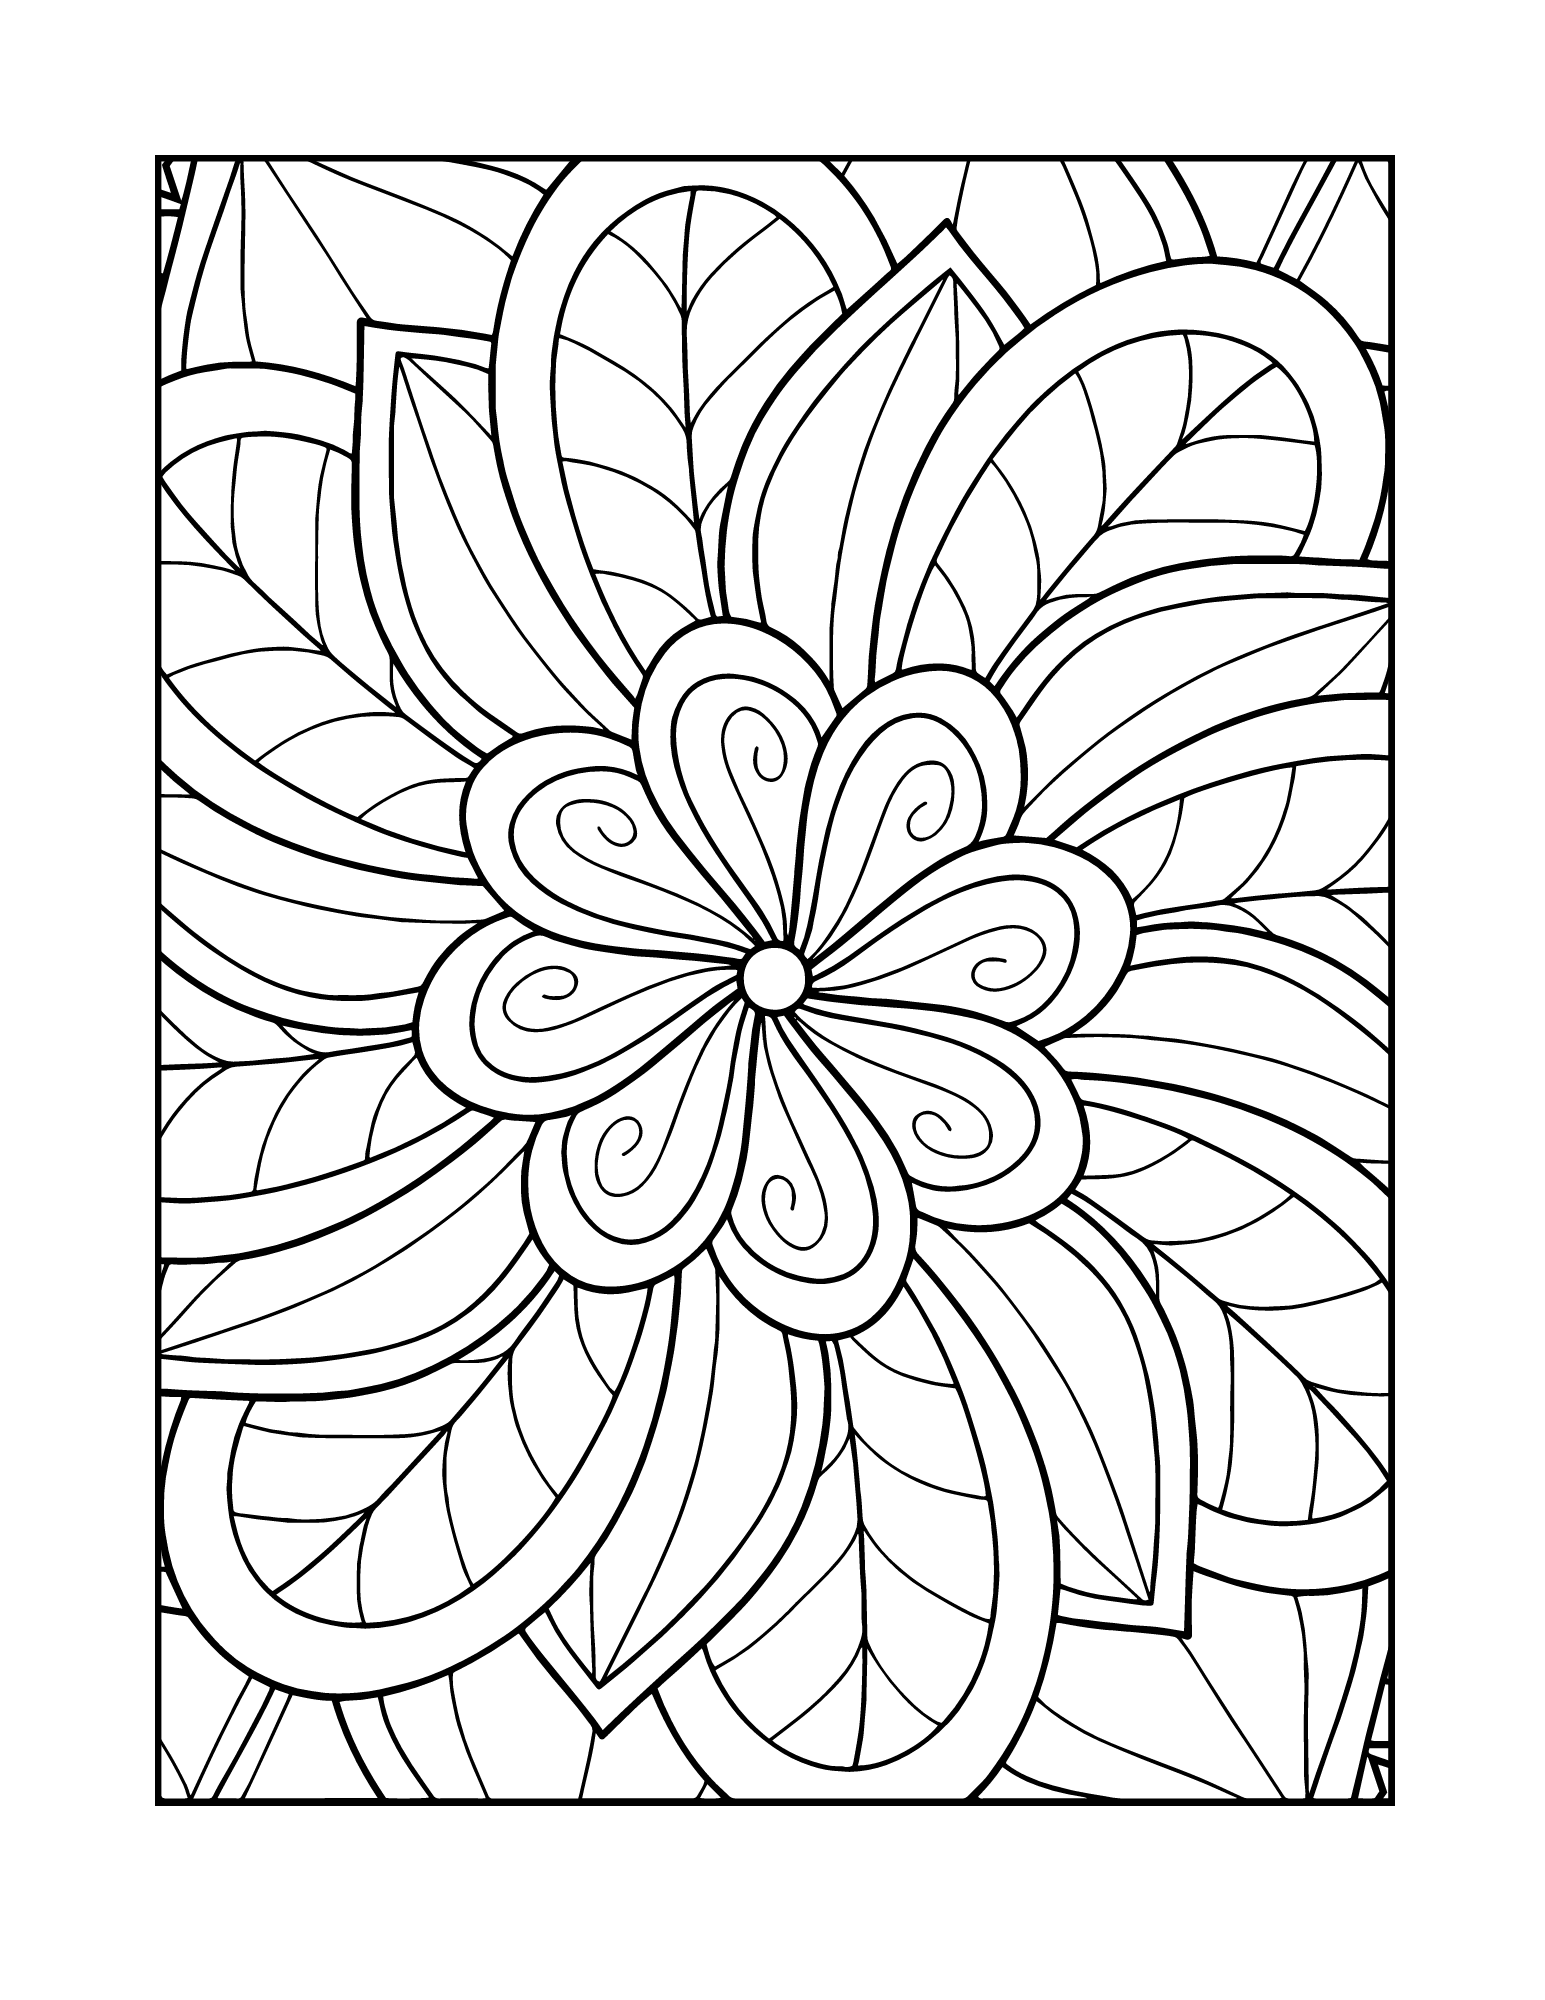 Adult Coloring Book- Mandalas: Color Therapy for Adults, Relax, Color, De-stress (8.5 X 11)-50 Mandala Designs (101 Pages) [Book]